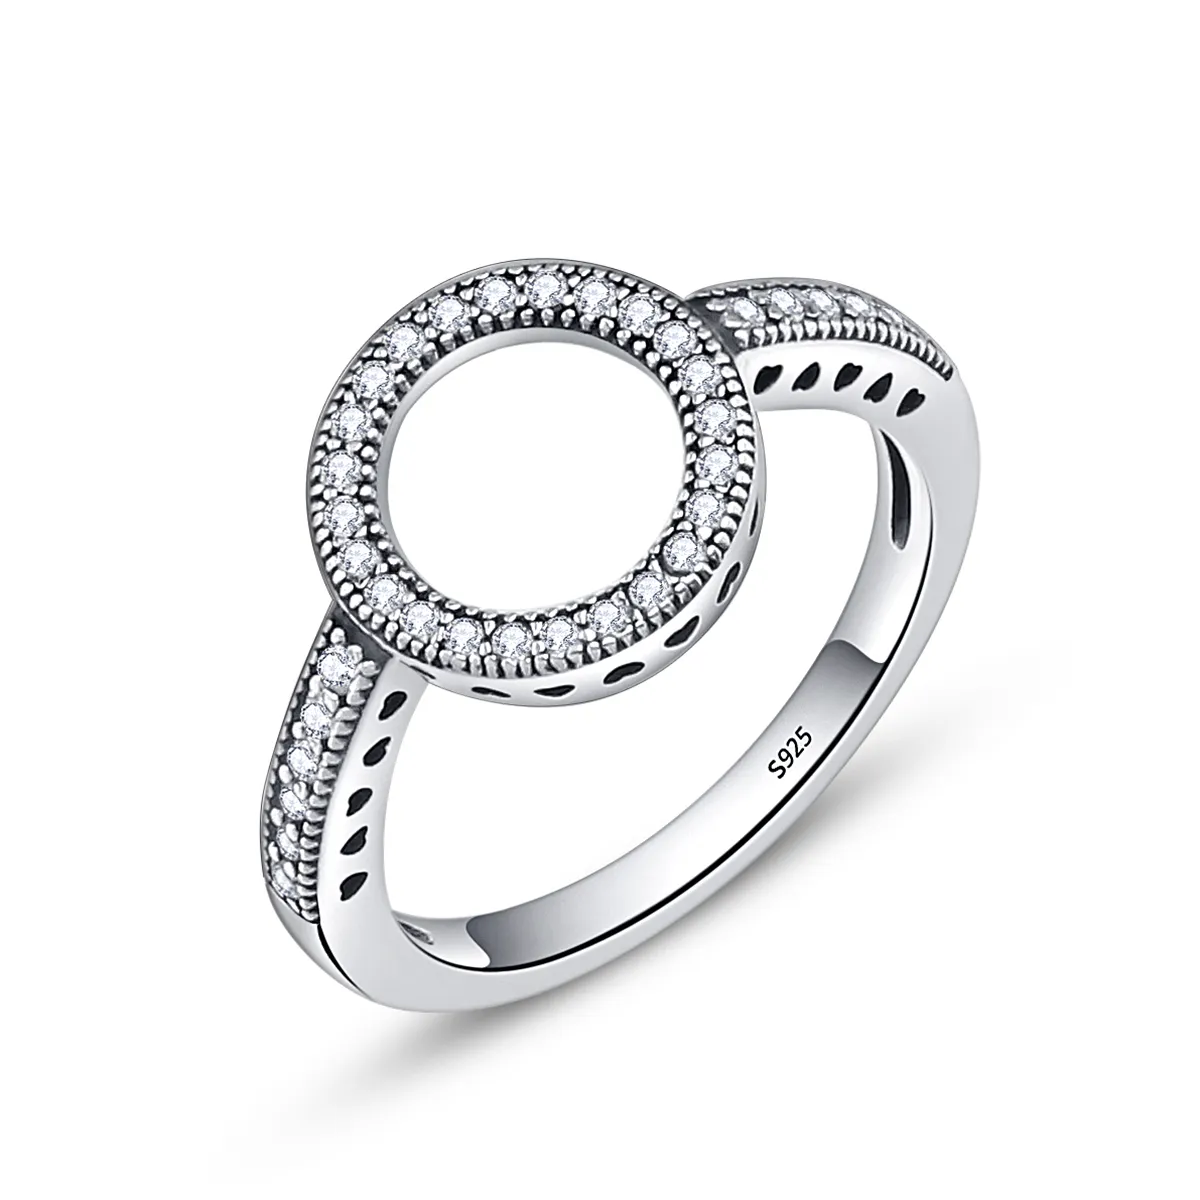 Pandora Style Silver Ring of Halo Ring - SCR041